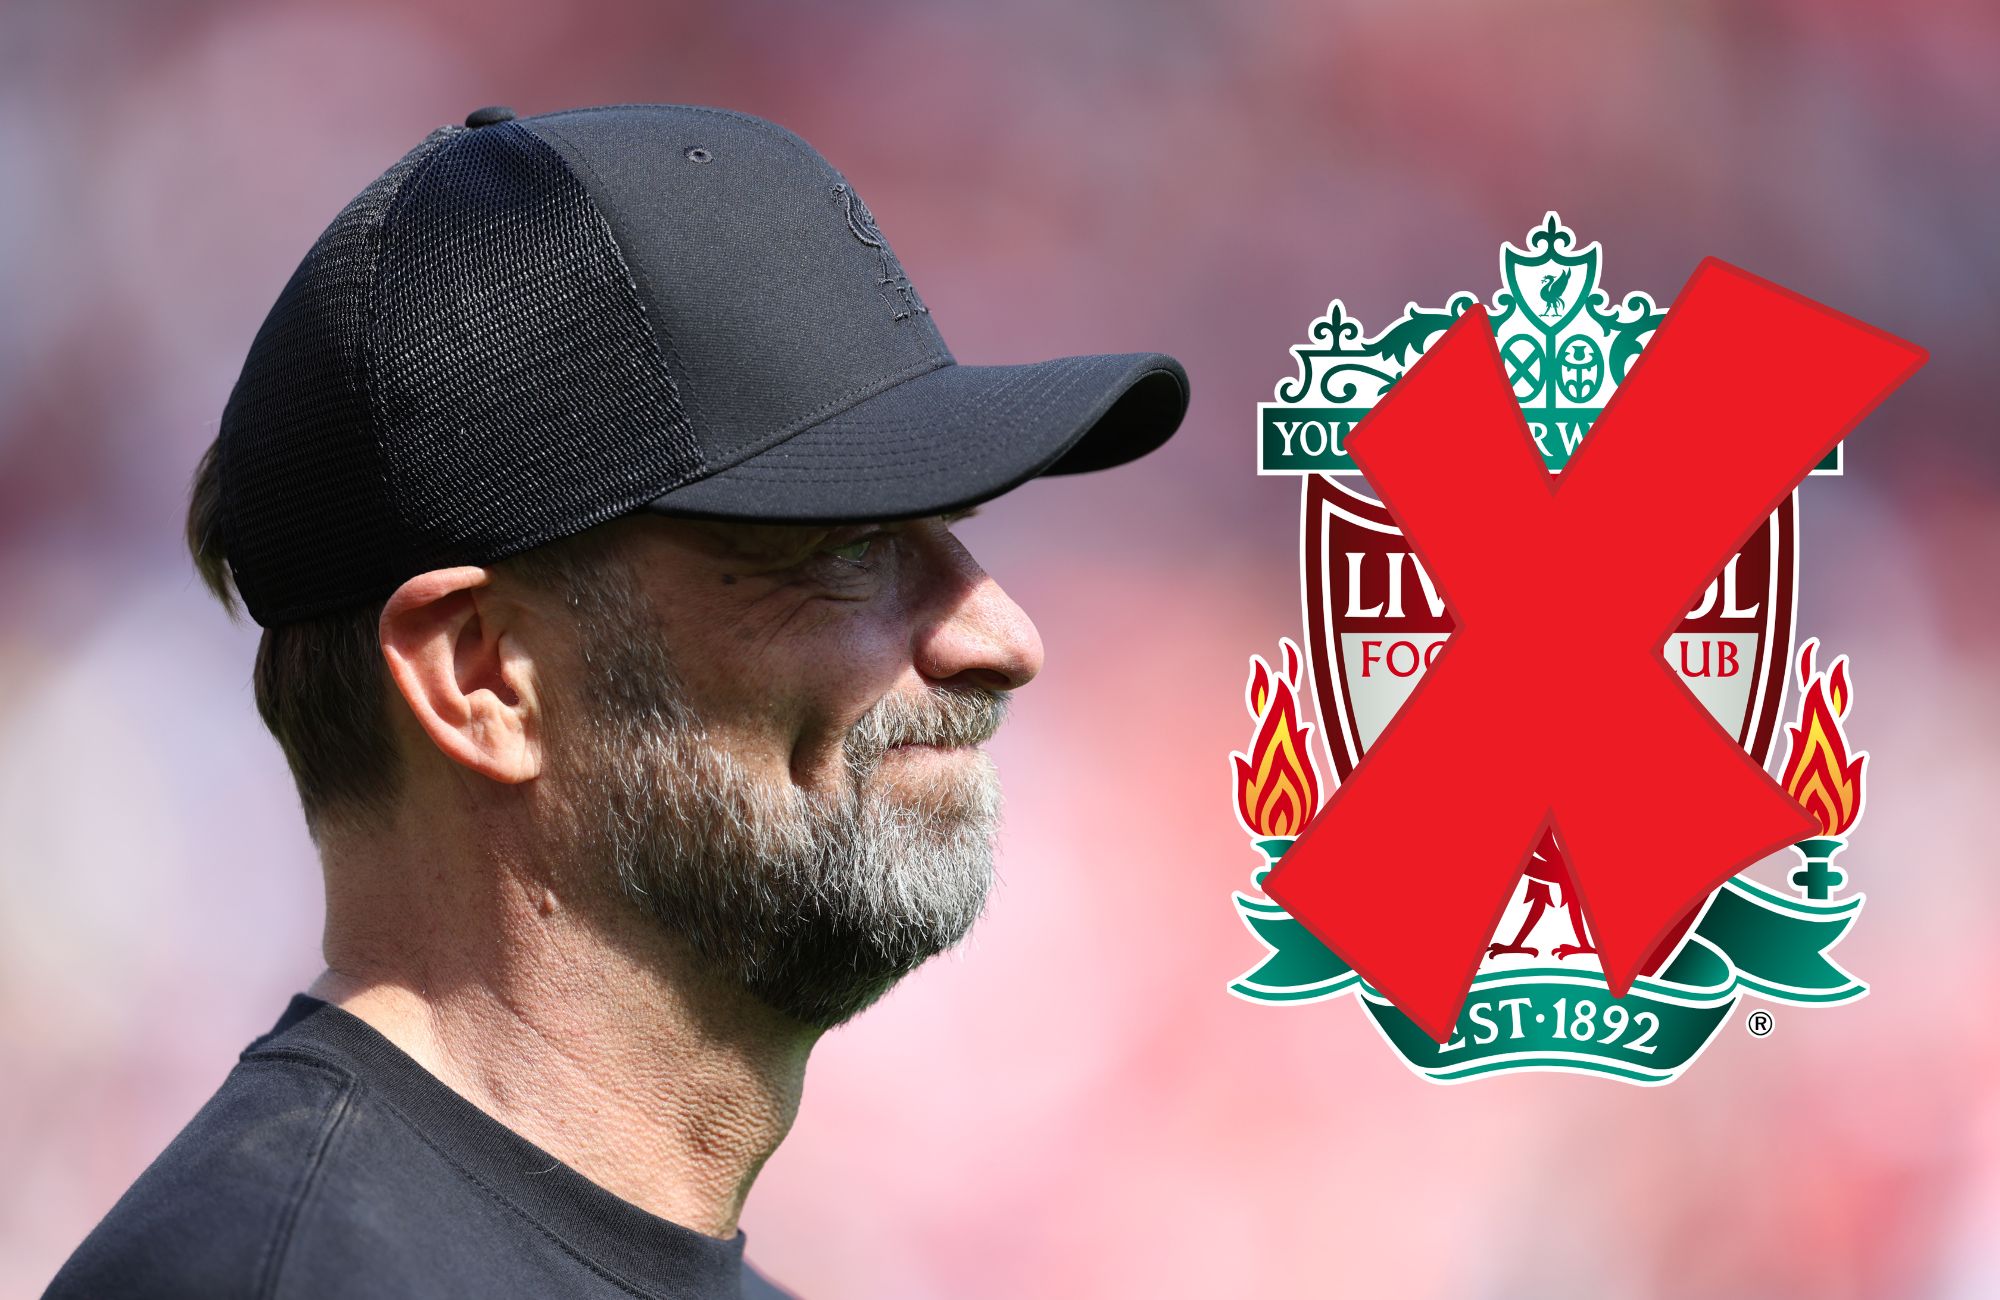 41-y/o coach told Klopp ‘no’ three times to becoming next Liverpool manager